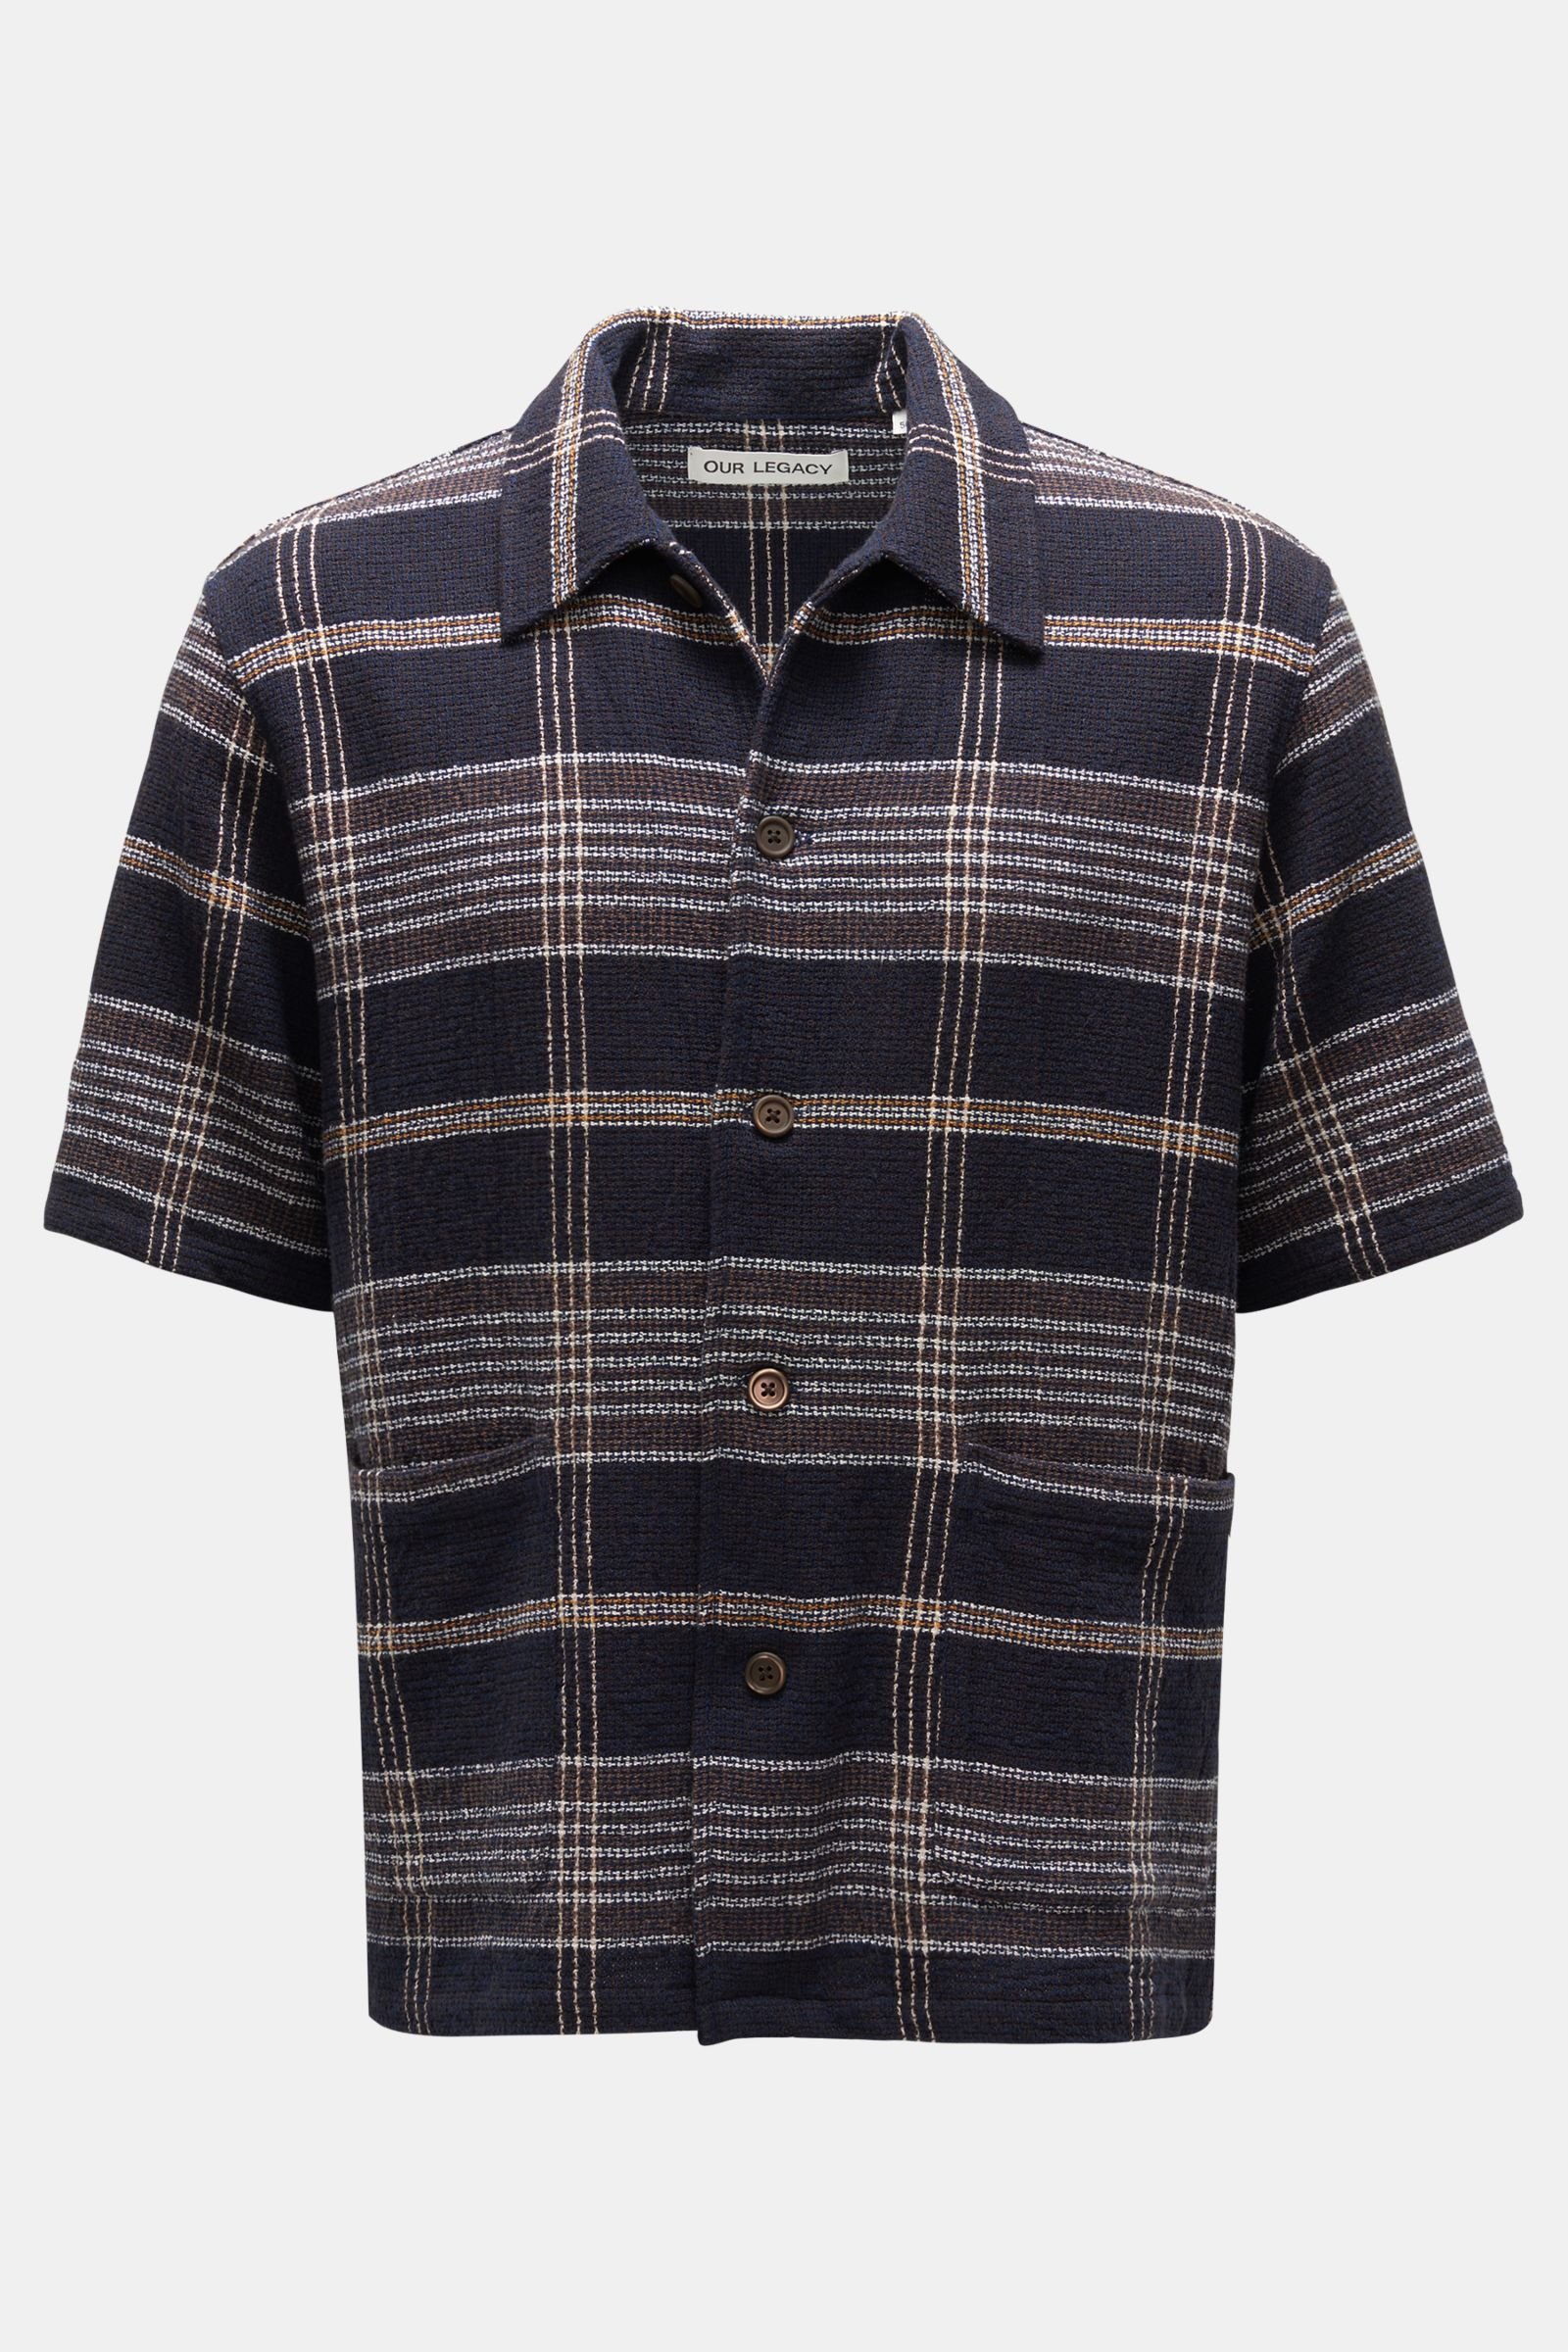 OUR LEGACY short sleeve overshirt 'Elder Shirt' navy/brown checked 